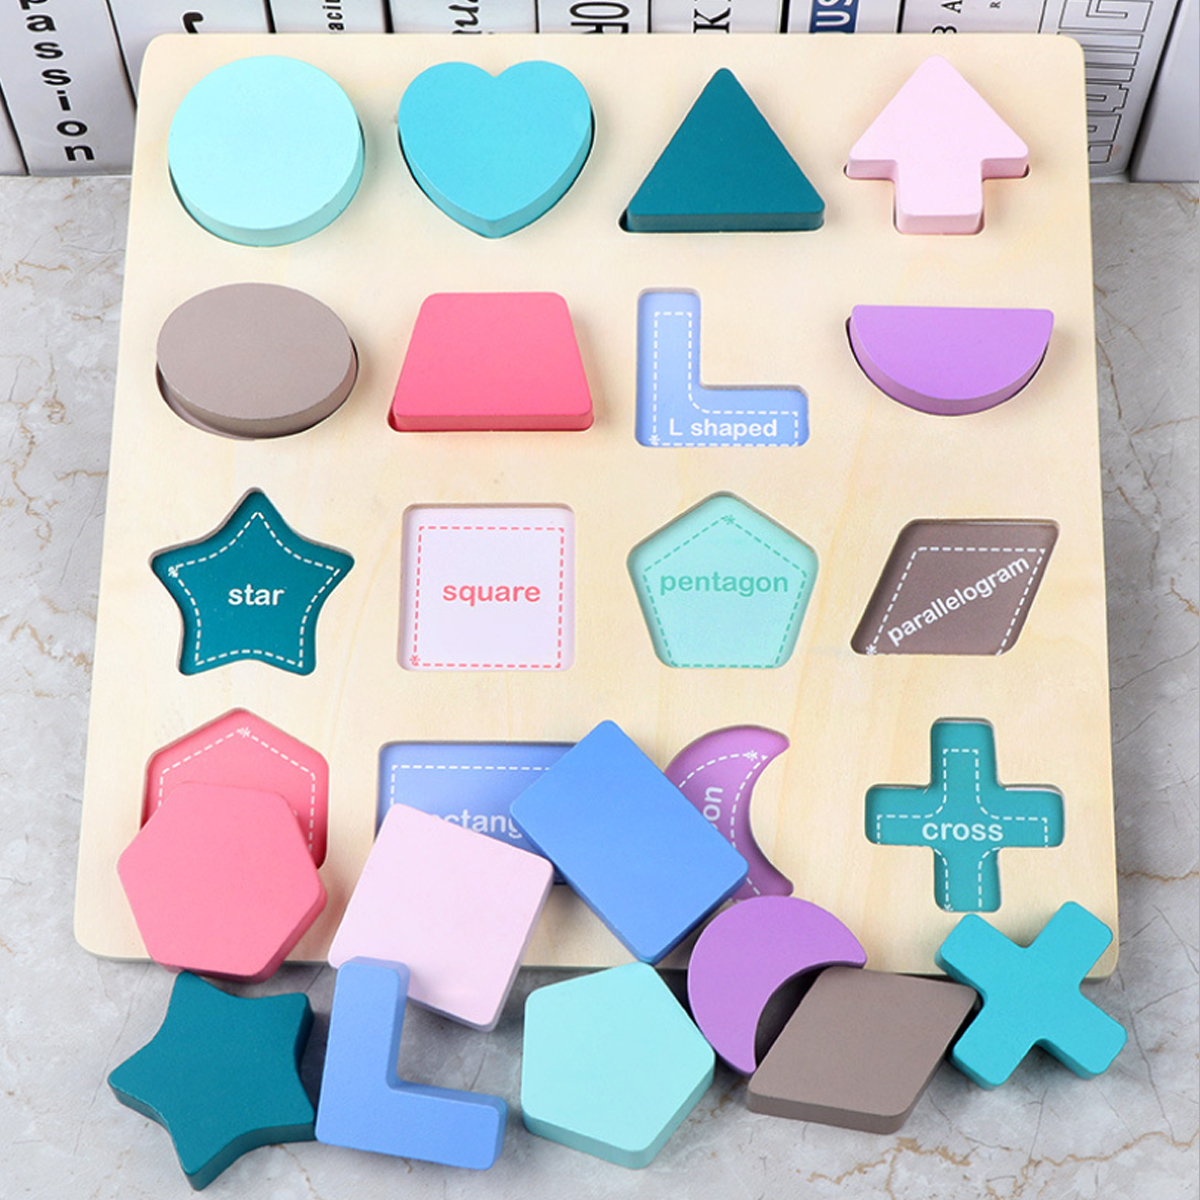 Alphanumeric-Board-Wooden-Jigsaw-Volume-Wooden-Baby-Young-Children-Early-Education-Educational-Toys-1635558-5